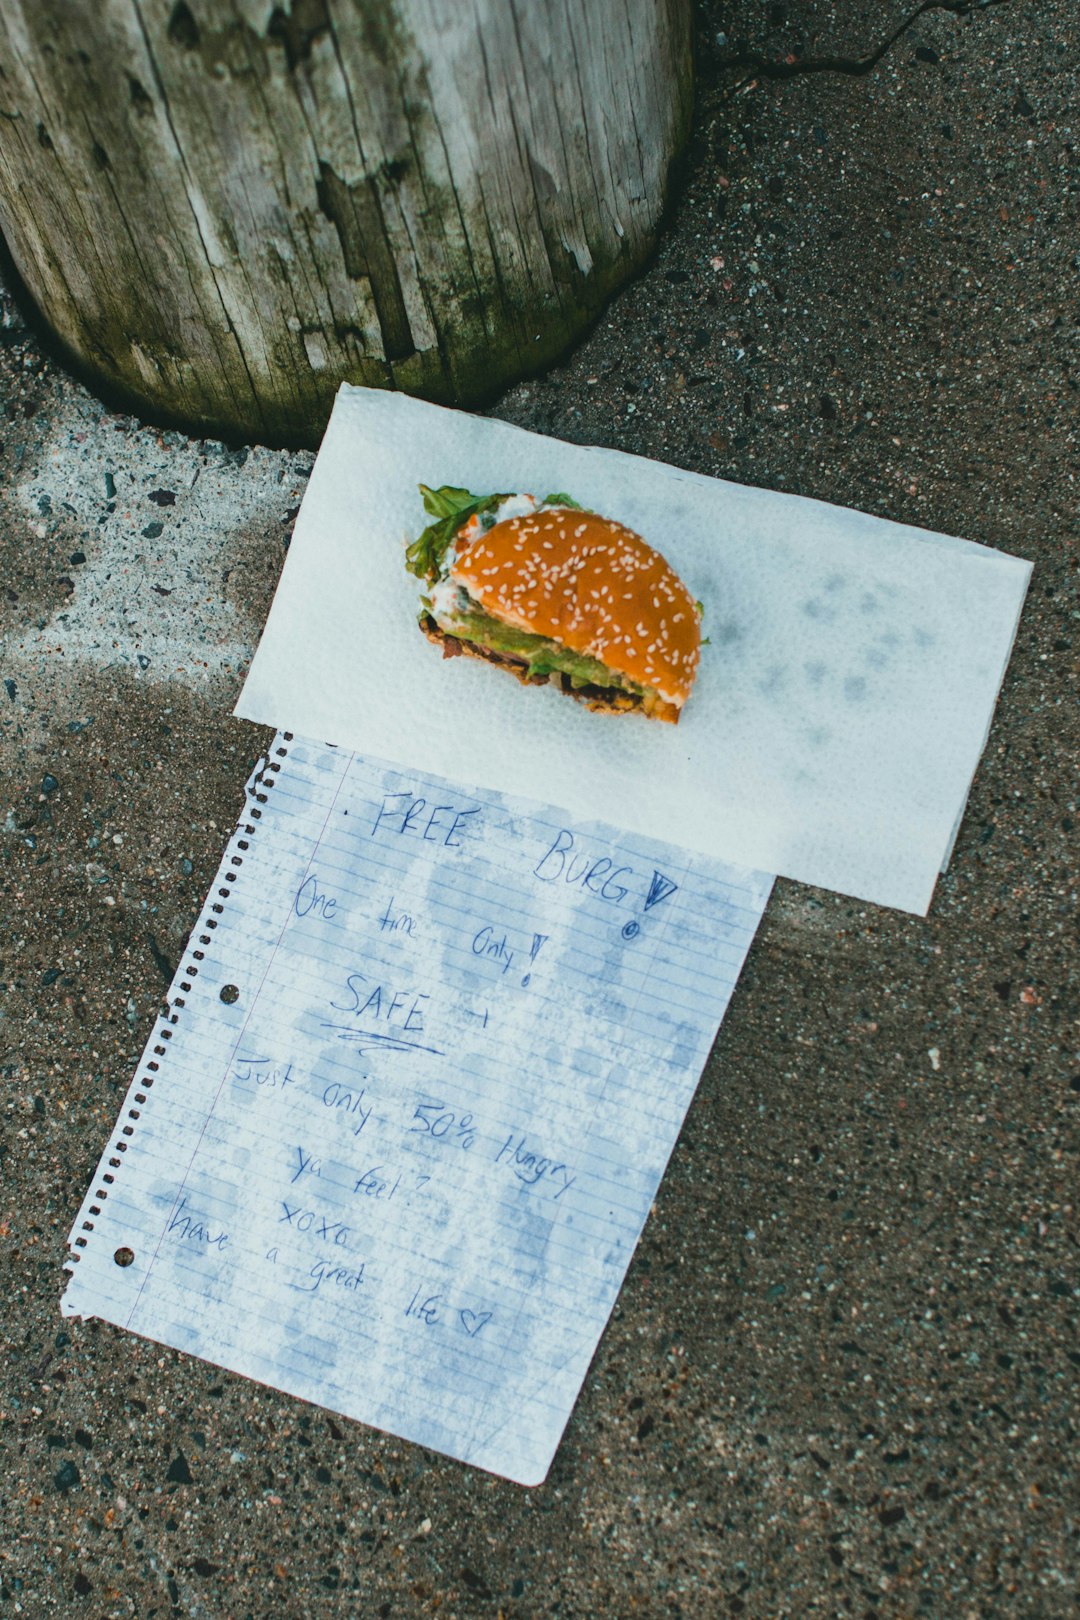 burger on white paper beside green and brown vegetable